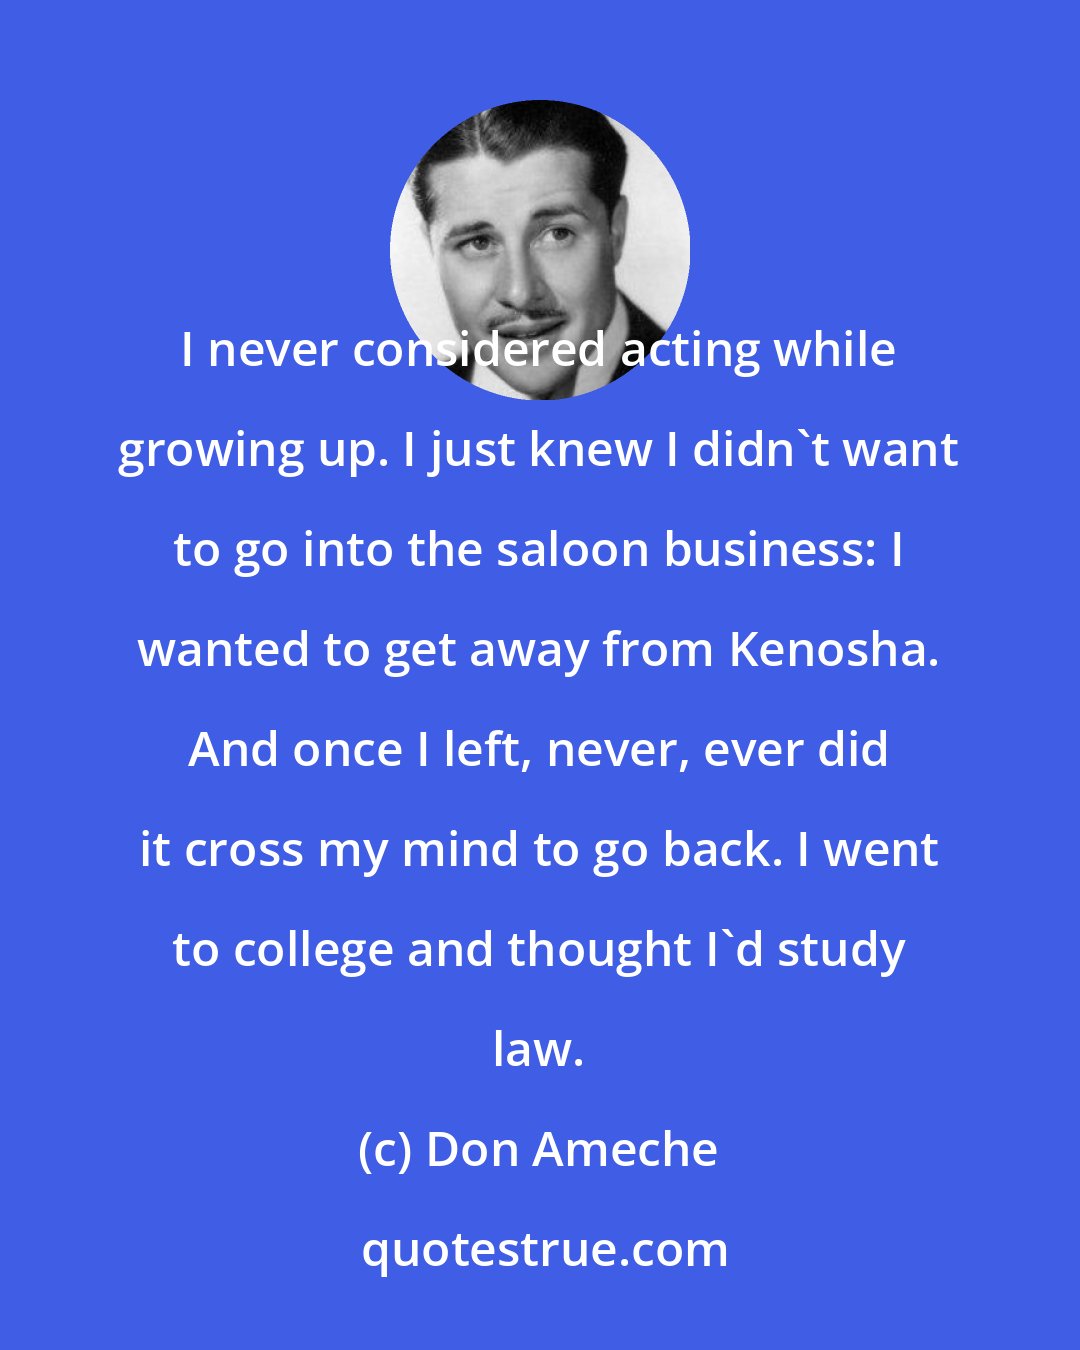 Don Ameche: I never considered acting while growing up. I just knew I didn't want to go into the saloon business: I wanted to get away from Kenosha. And once I left, never, ever did it cross my mind to go back. I went to college and thought I'd study law.